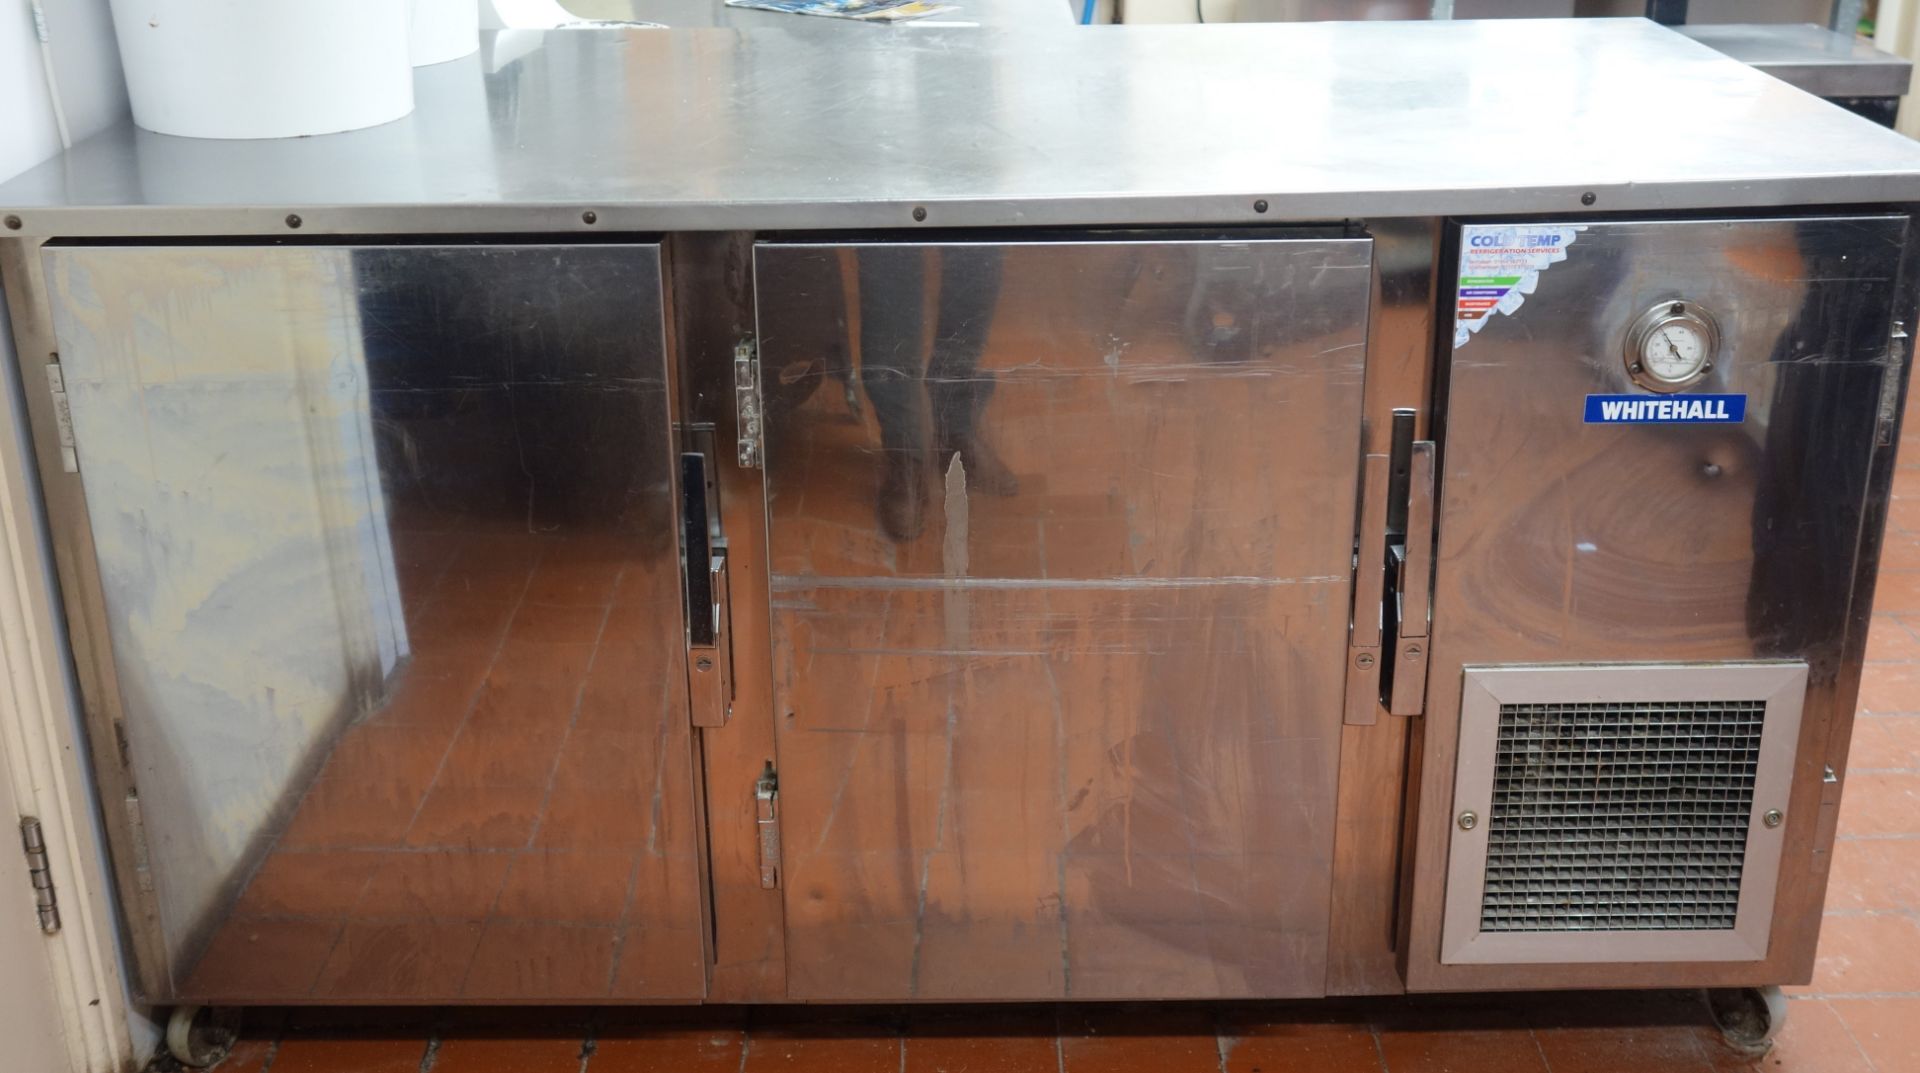 Whitehall commercial stainless steel three door refrigerating counter, W159cm, H88cm,